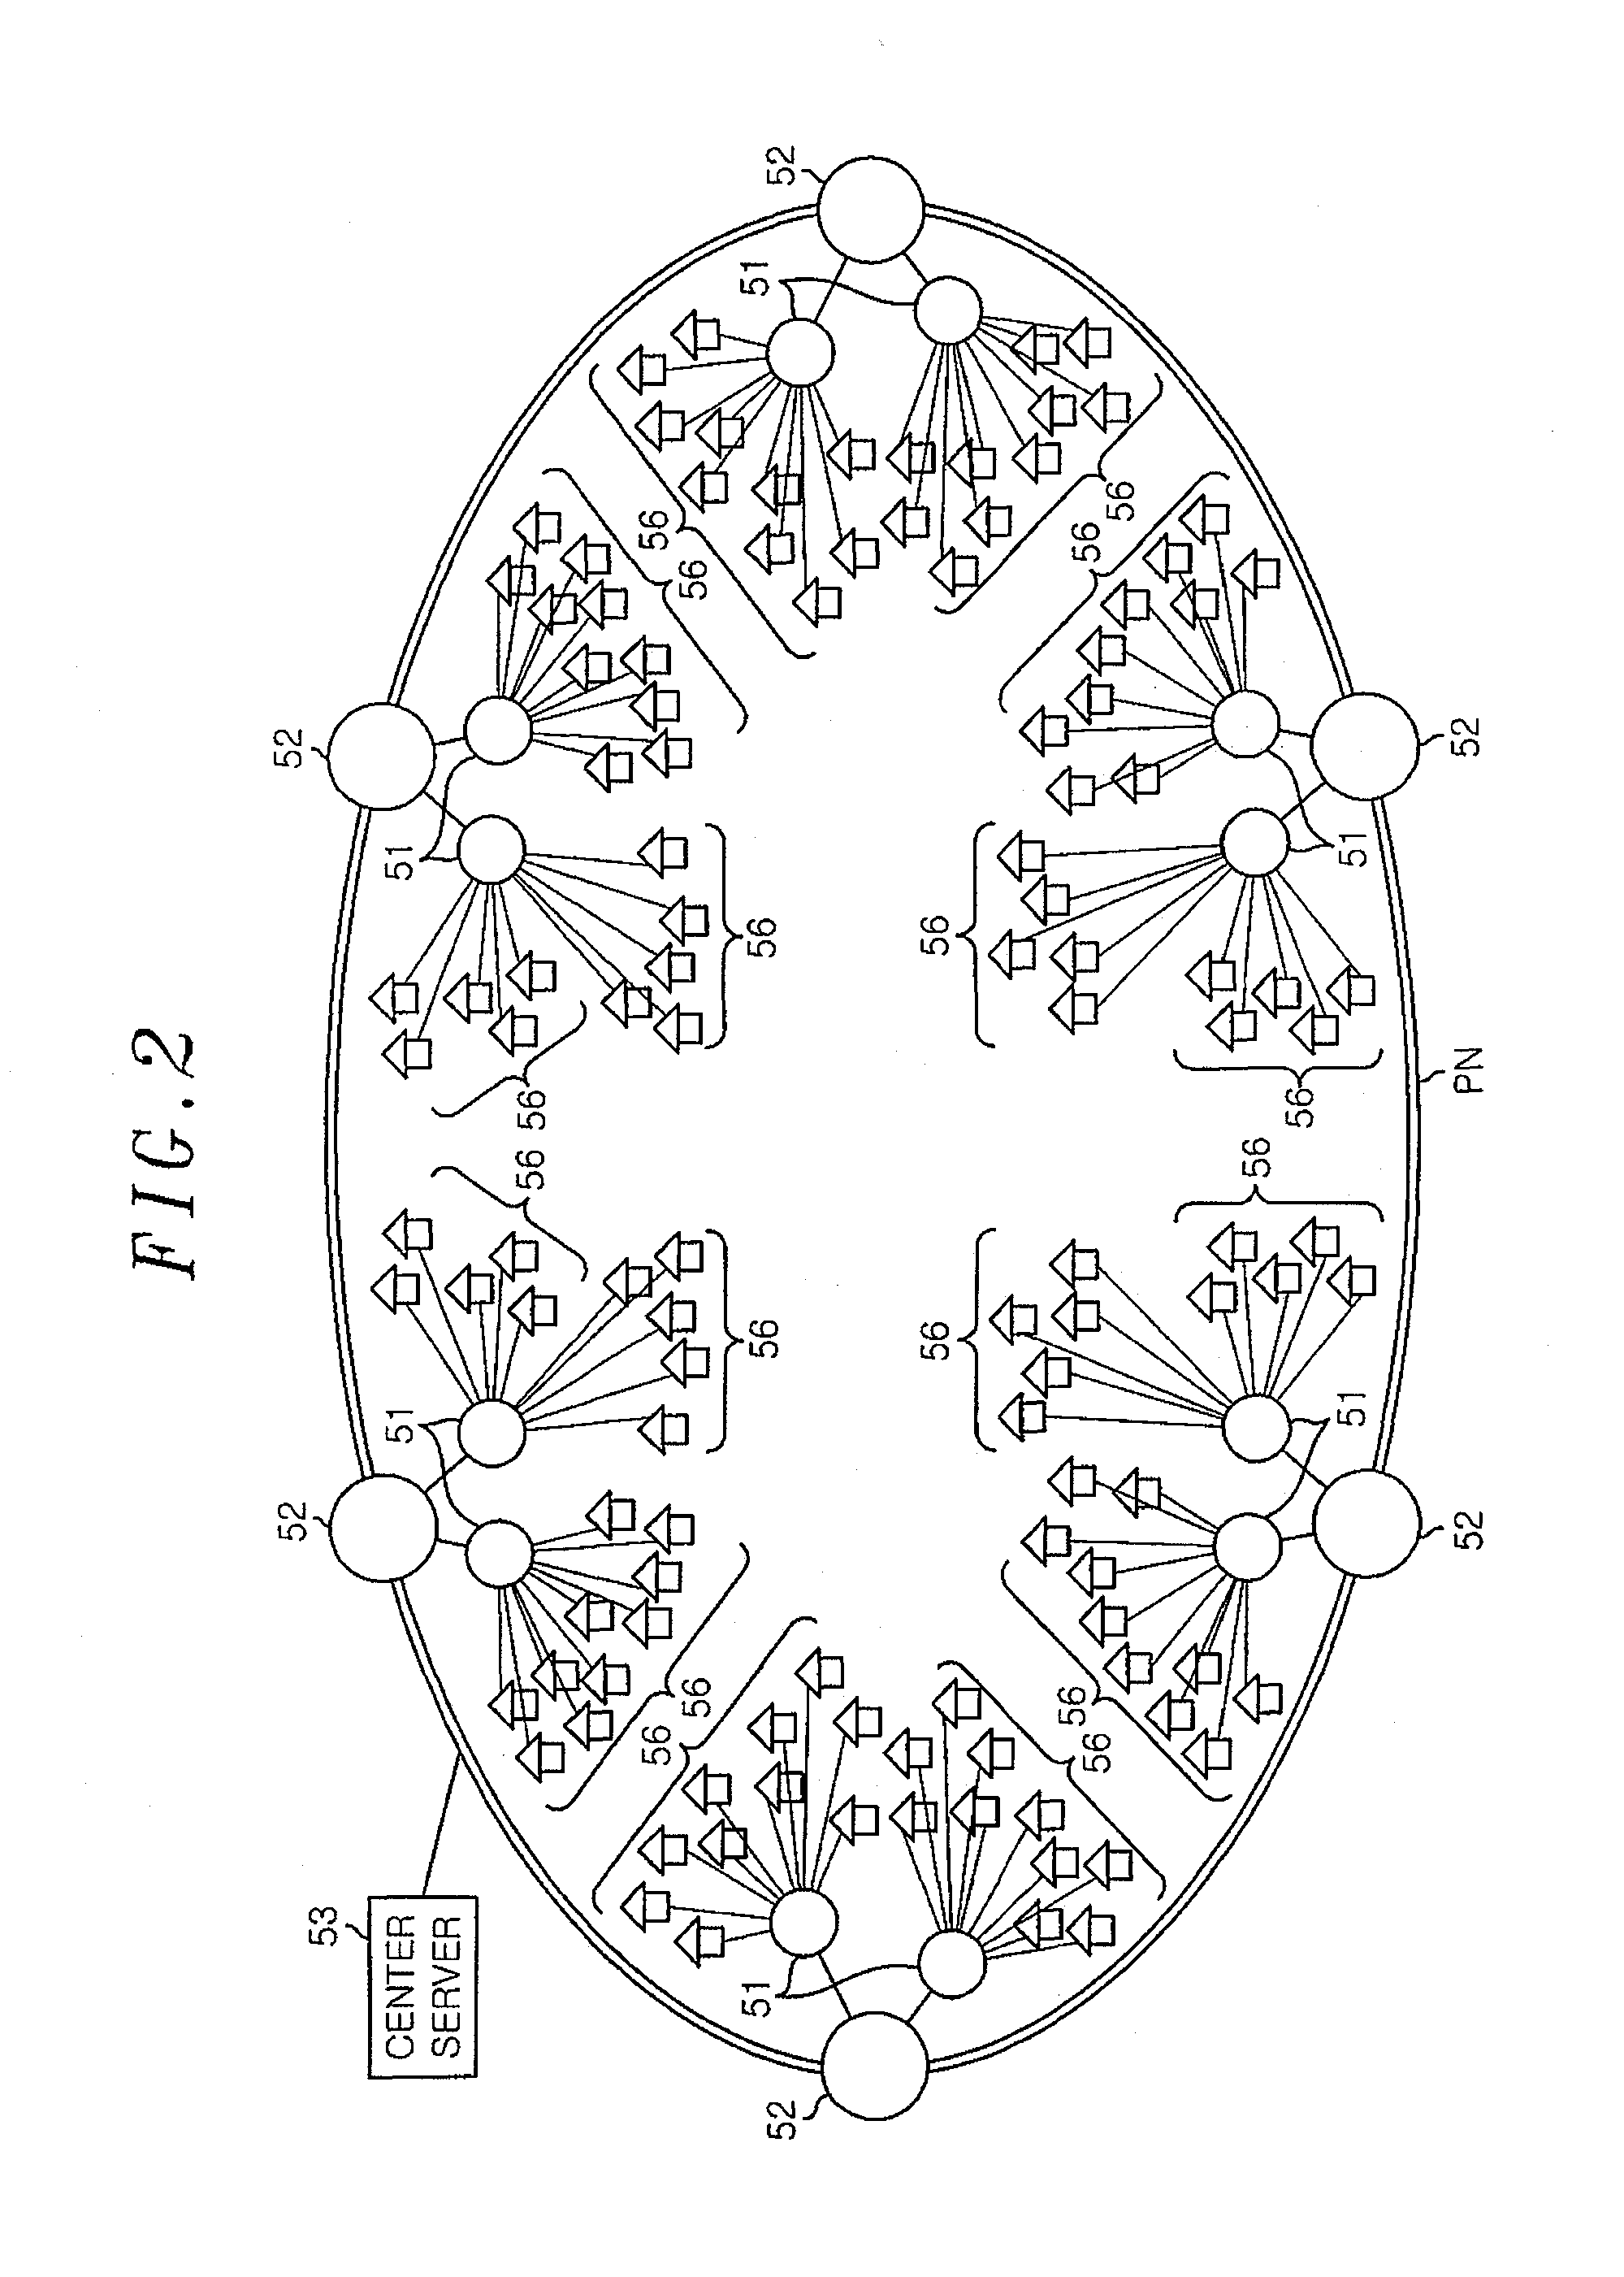 Electric power distribution system